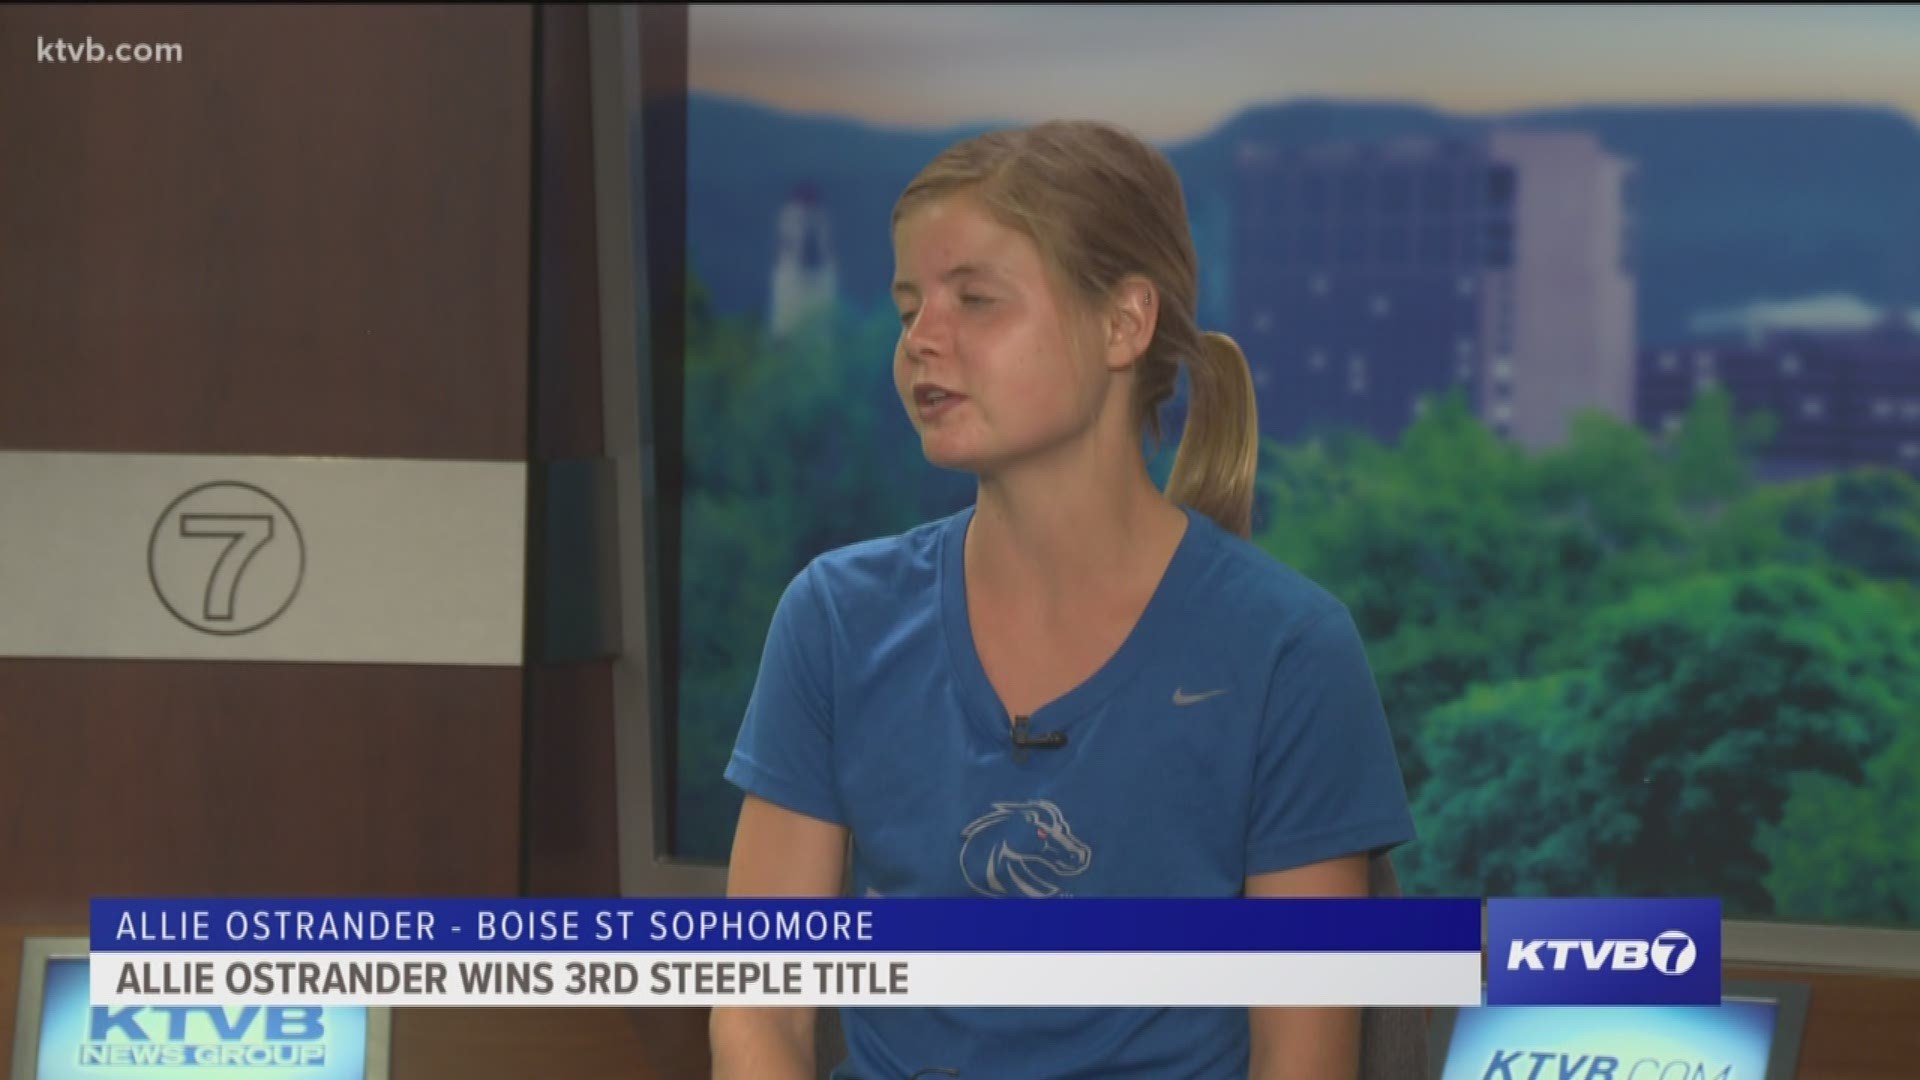 Boise State University's Allie Ostrander has etched her name into Boise State and NCAA Track and Field history on Saturday afternoon after she won her third consecutive steeplechase national title.